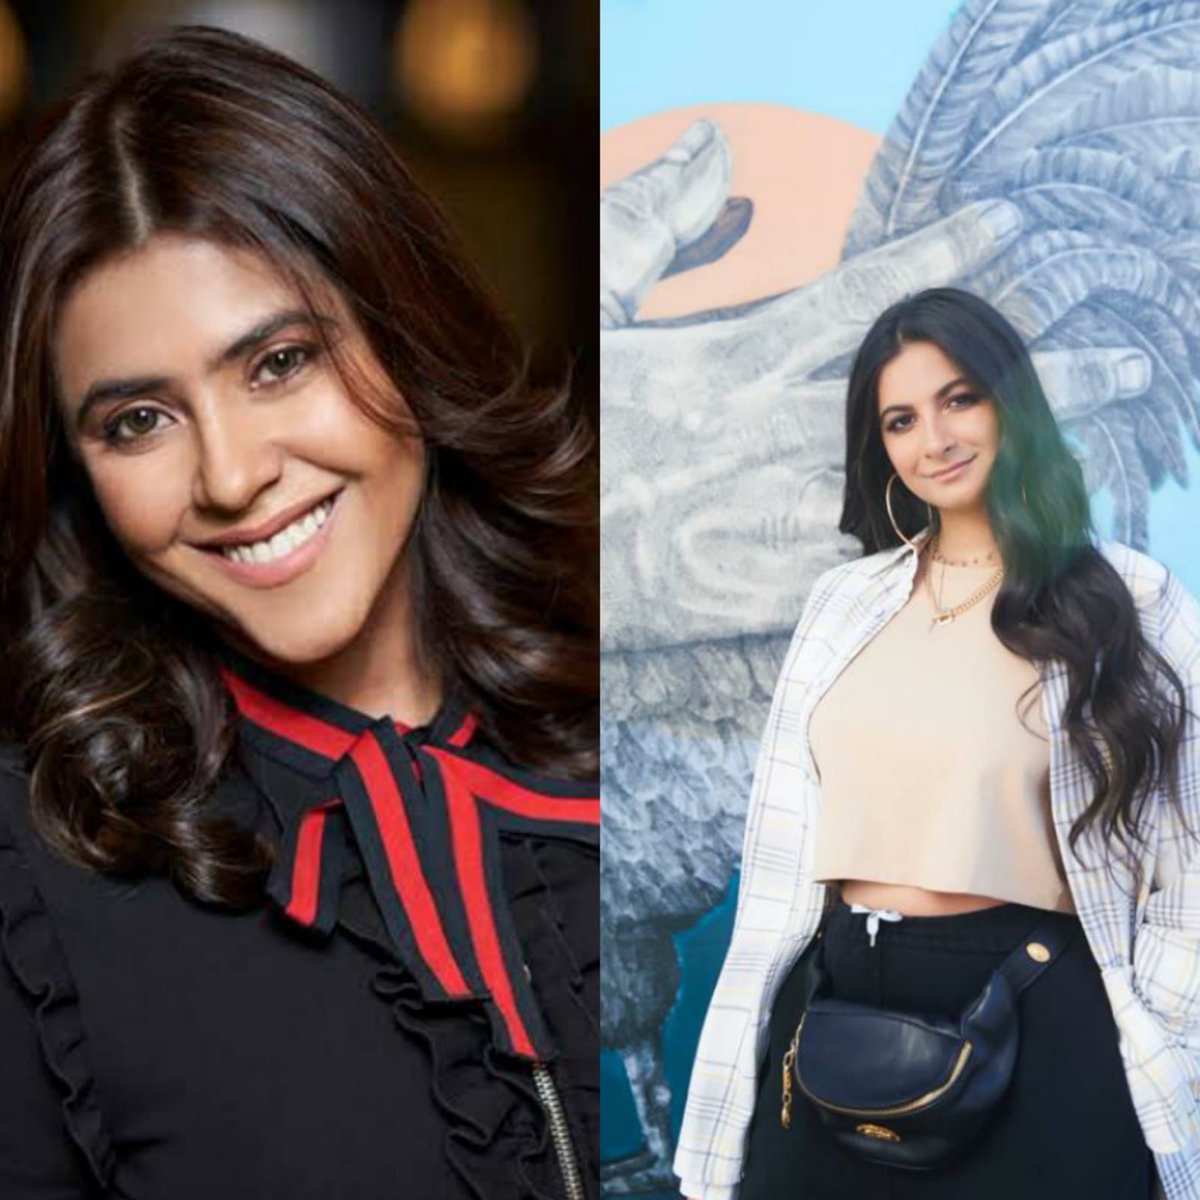 EKTAA KAPOOR - RHEA KAPOOR REUNITE… LOCK RELEASE DATE OF NEW MOVIE… Producers #EktaaKapoor and #RheaKapoor join forces yet again [after
 #VeereDiWedding and #TheCrew] for an upcoming film [not titled yet]… Also locked the release date: 22 Sept 2023… Details soon.